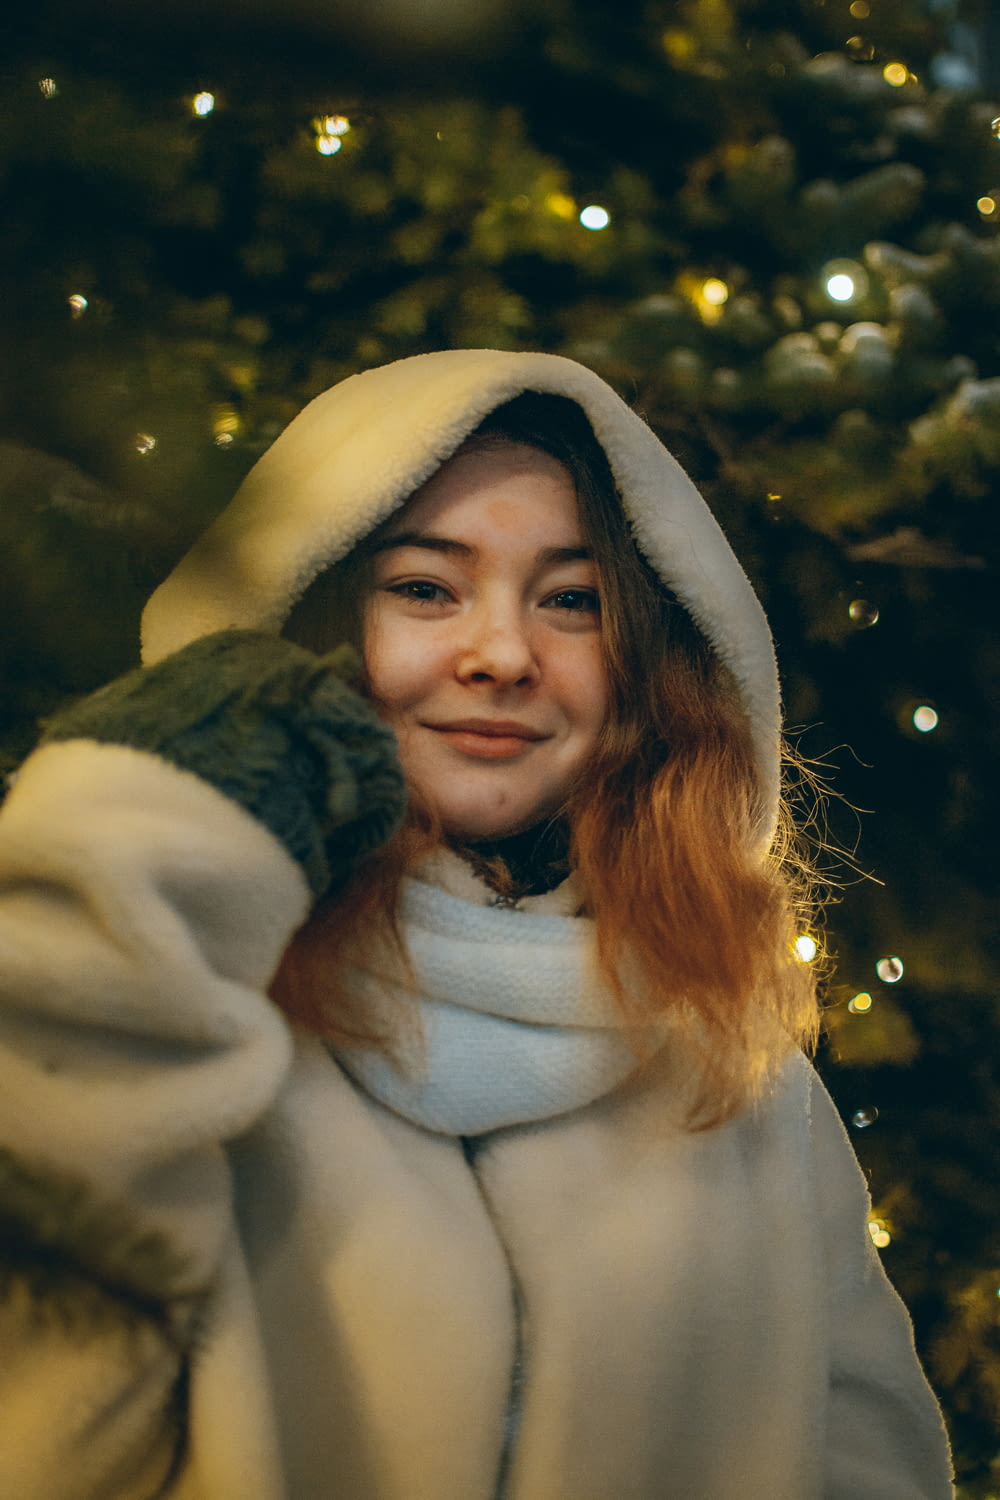 woman in white and green coat smiling